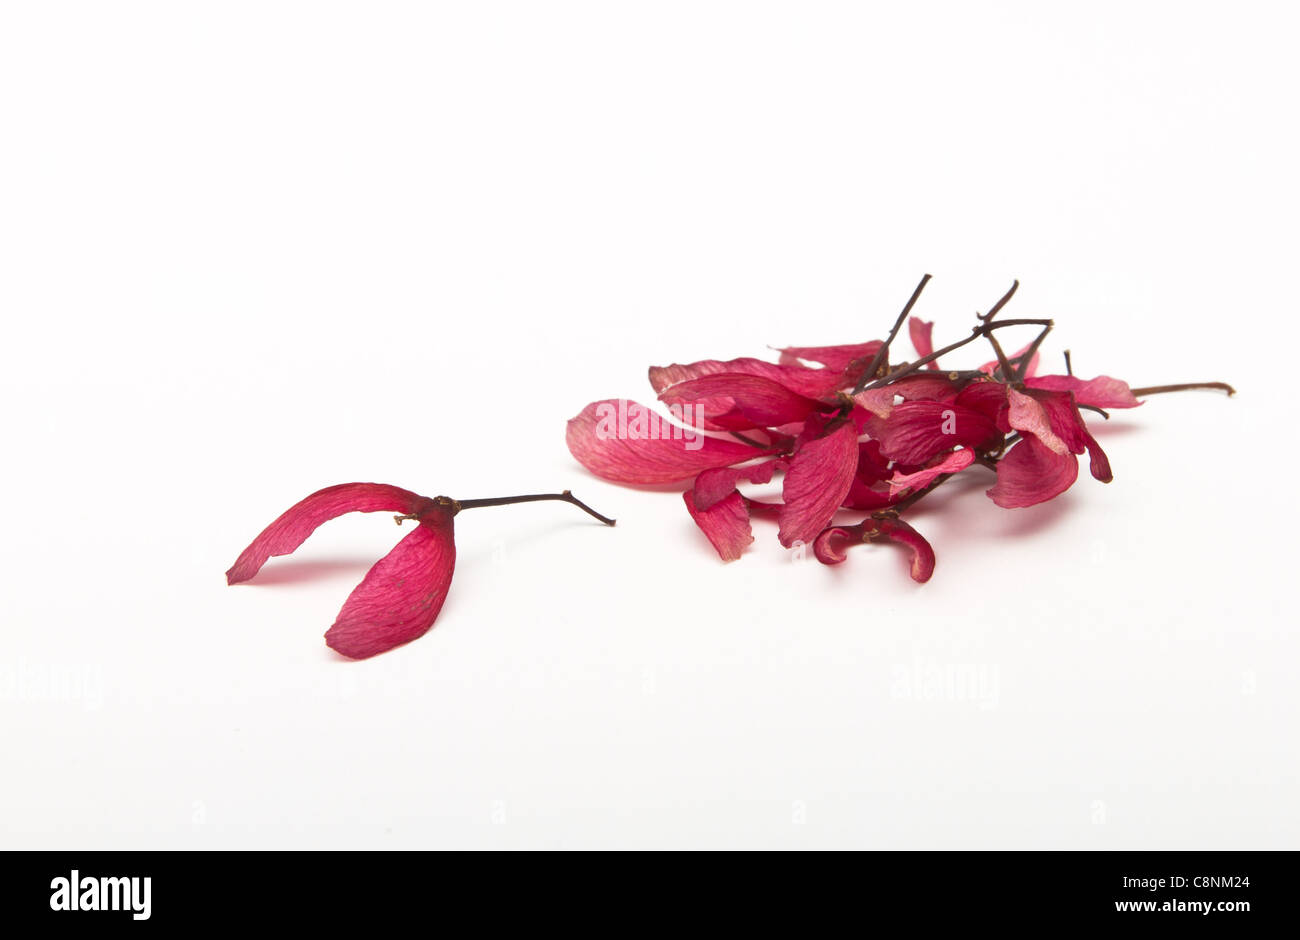 Japanese acer seeds from low perspective on white background. Stock Photo